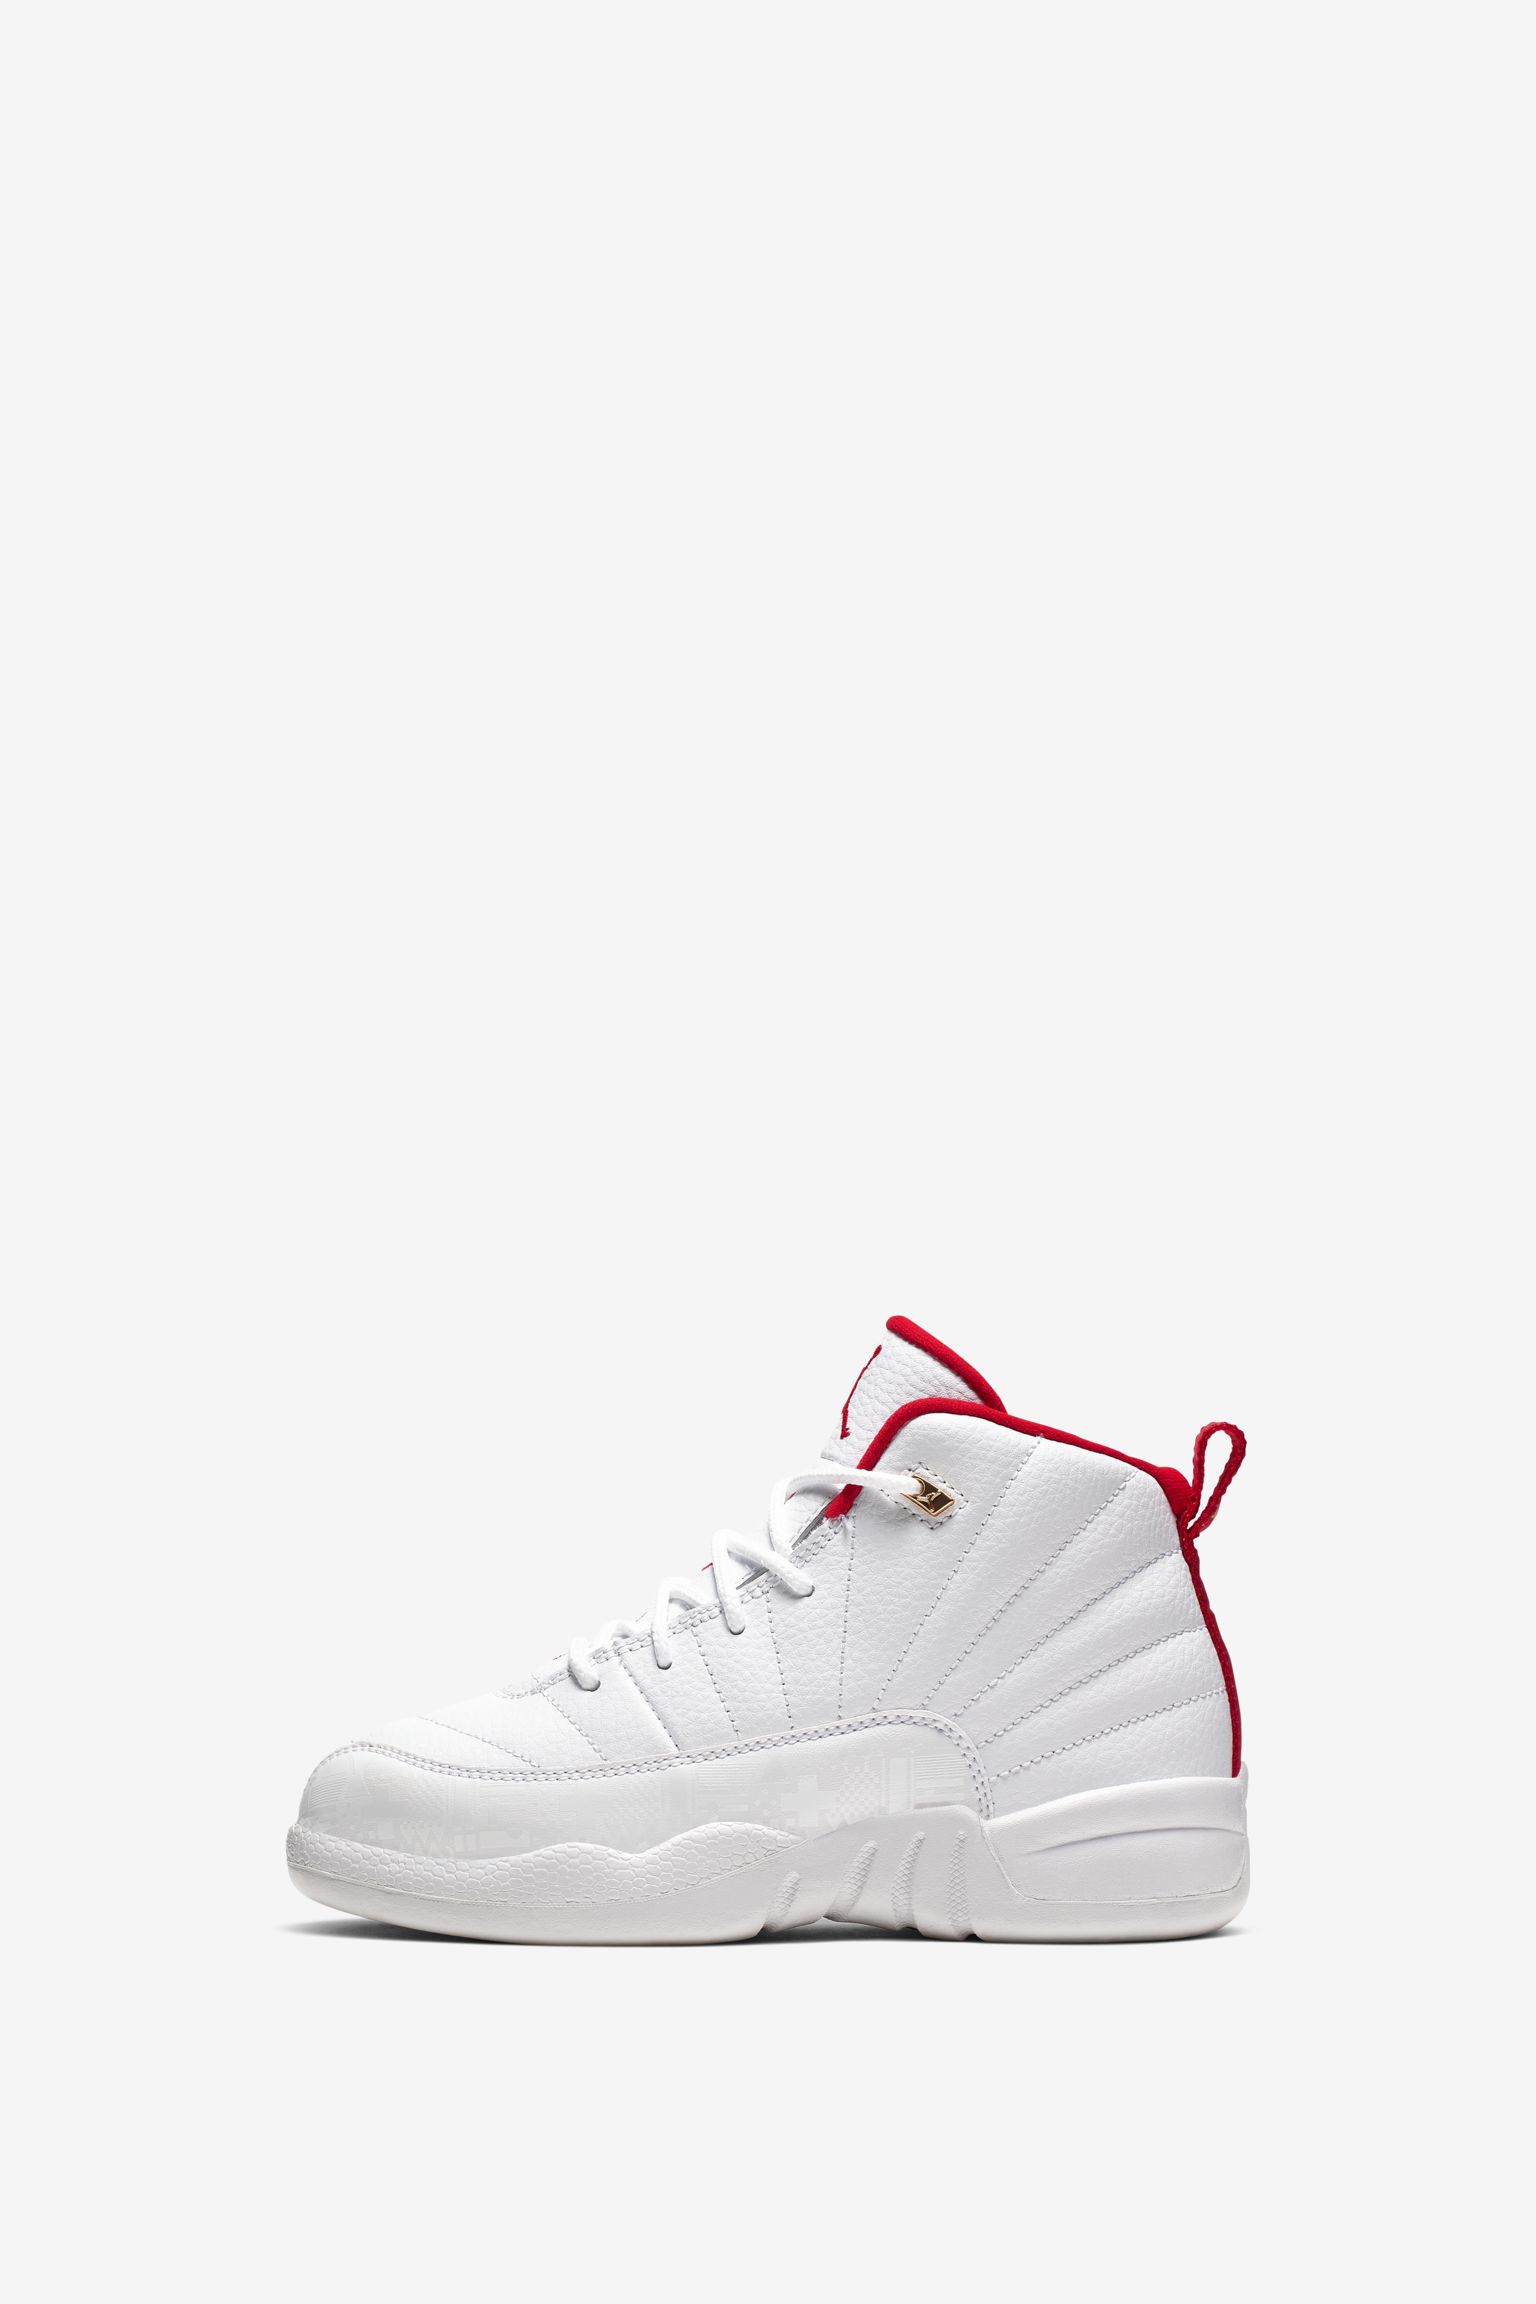 white gold and red jordans